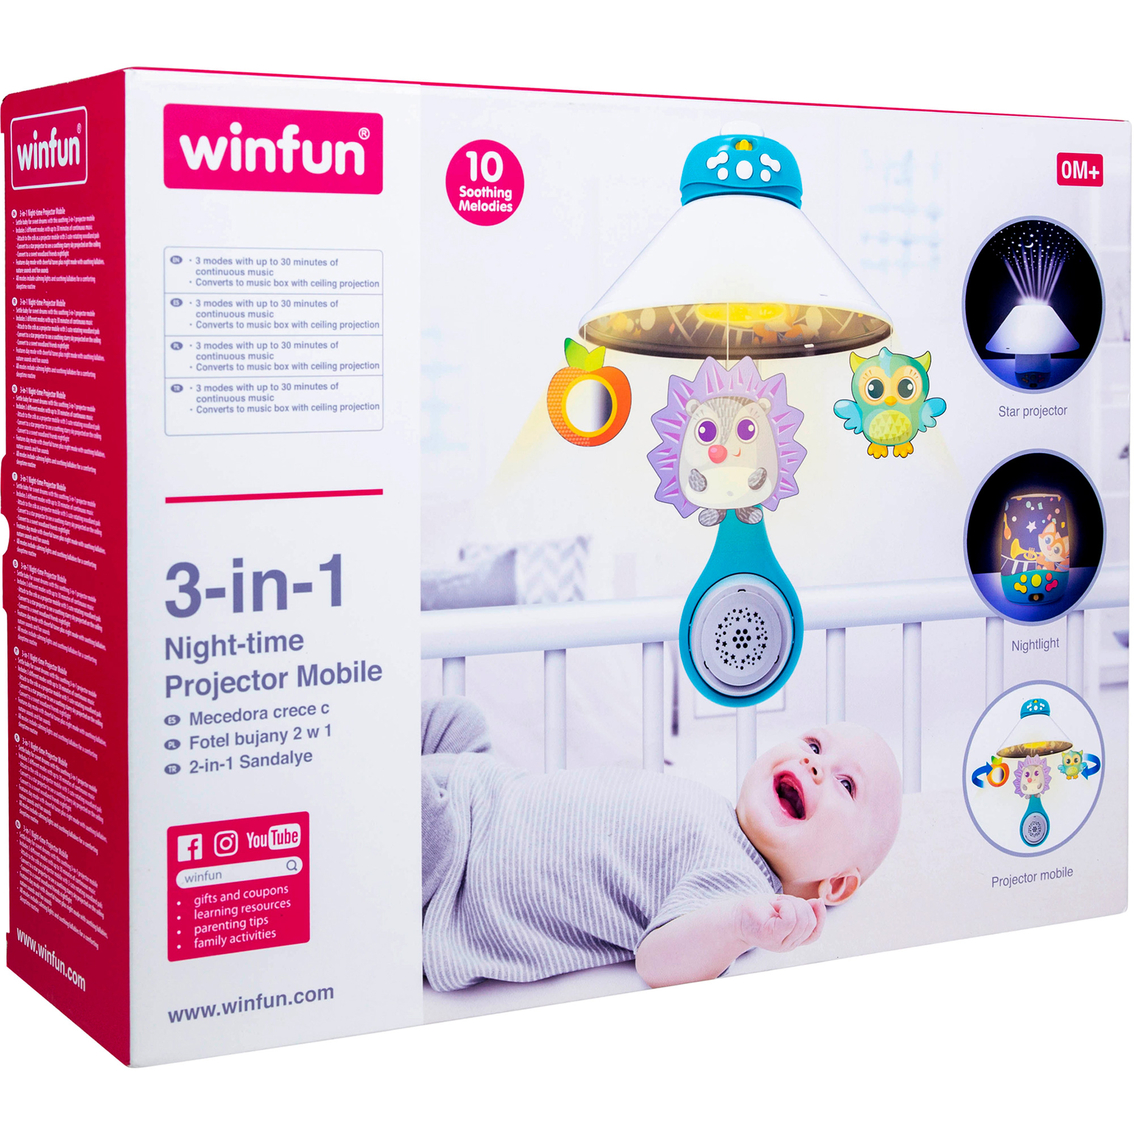 Winfun 3 in 1 Nighttime Projector Mobile - Image 4 of 4